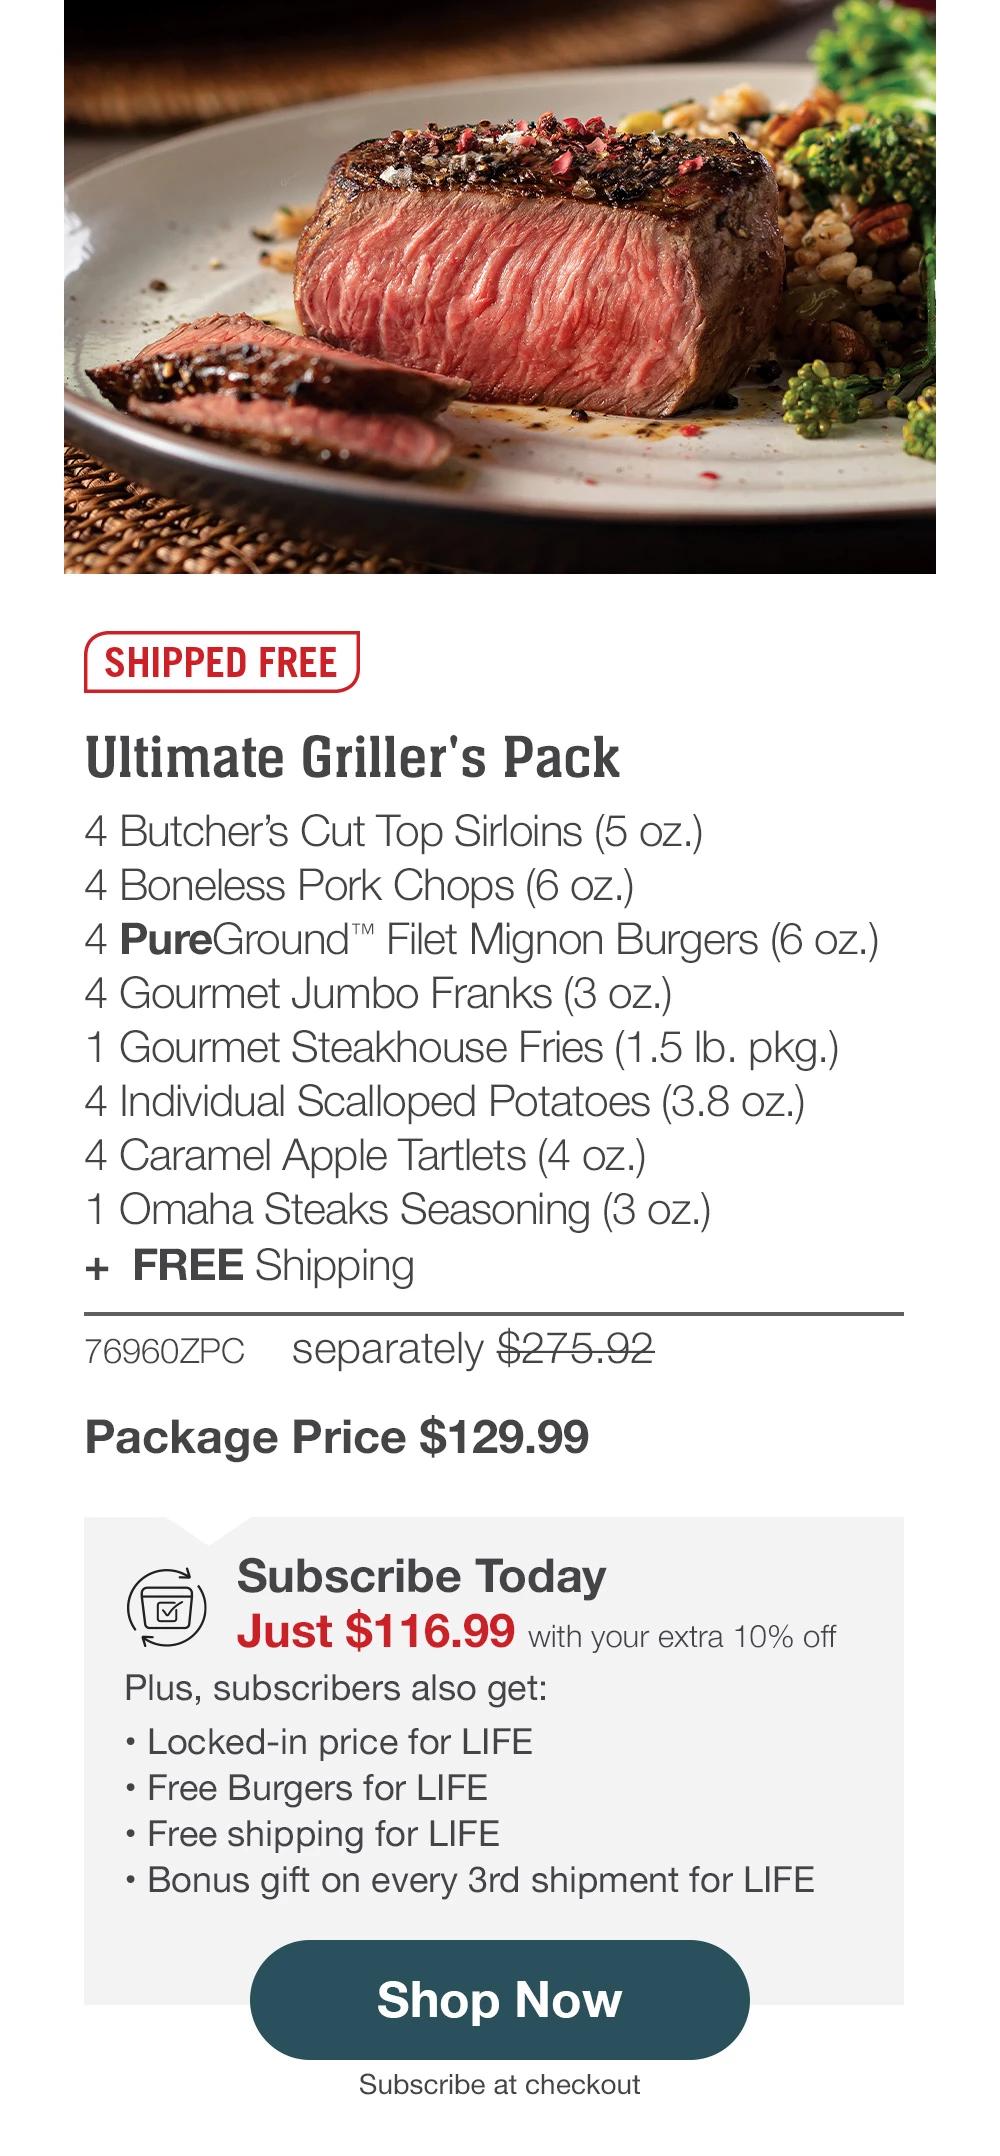 SHIPPED FREE | Ultimate Griller's Pack - 76960ZPC separately $275.92 | Package Price $129.99 | Subscribe Today - Just $116.99 with your extra 10% off Plus, subscribers also get: Locked-in price for LIFE | Free Burgers for LIFE | Free shipping for LIFE | Bonus gift on every 3rd shipment for LIFE || Shop Now || Subscribe at checkout